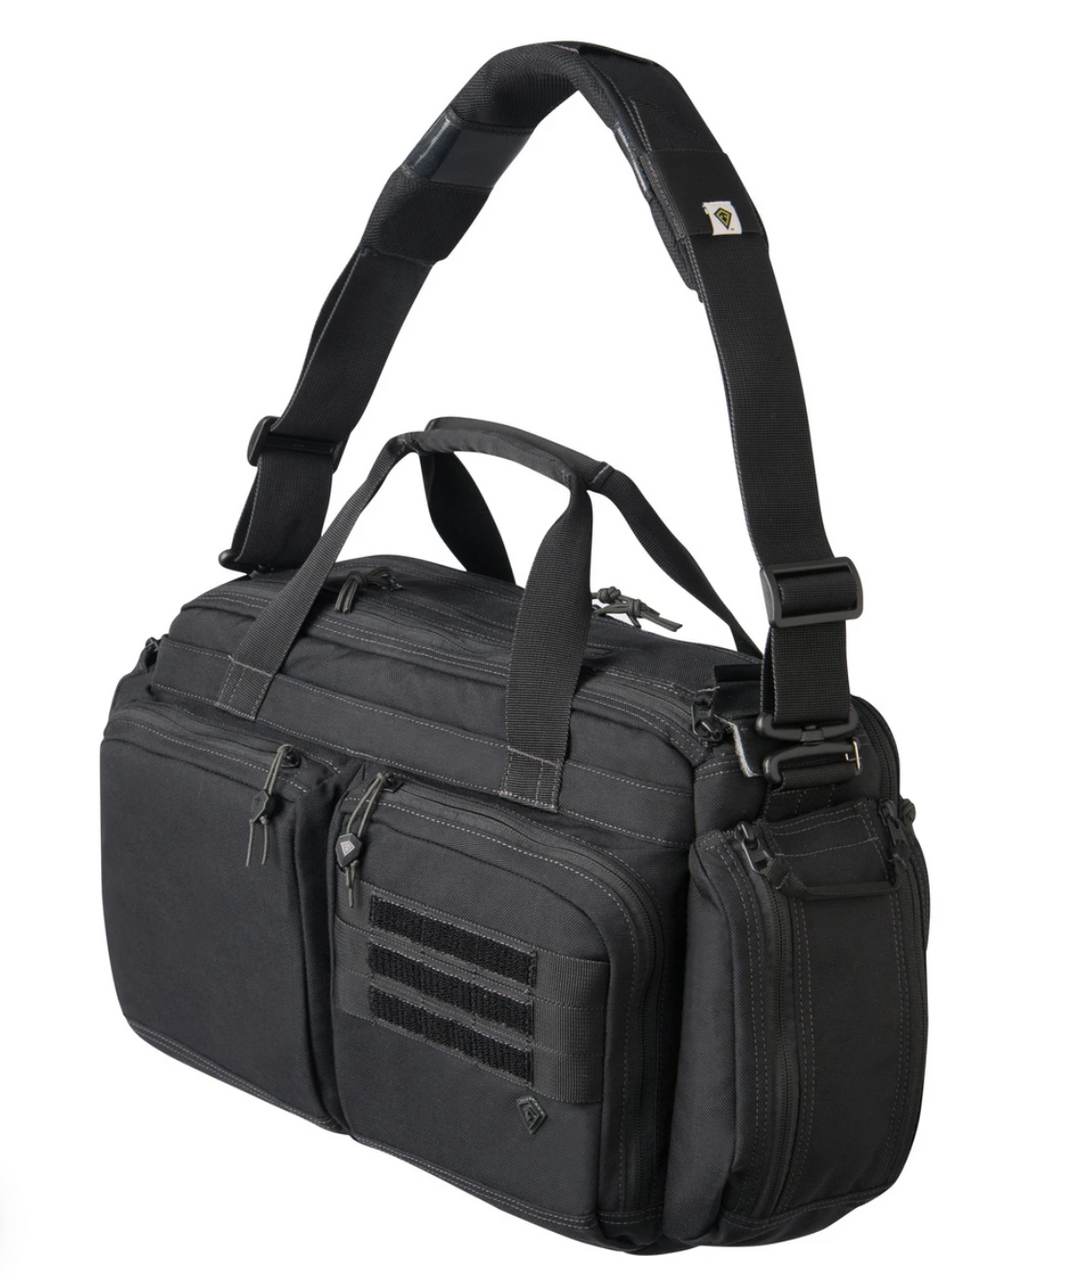 This briefcase style office-to-field bag is designed to provide all of the room and durability you require to carry out your duty. Double strength nylon fabric and premium YKK® zippers/Duraflex® hardware gives you a sturdy exterior you can rely on. Foam padded main and computer compartments keep items separate and protected, while three inner drop pockets, hidden front hook/loop secured pocket, and zip out water bottle/gear pockets provide extra storage space with organization.